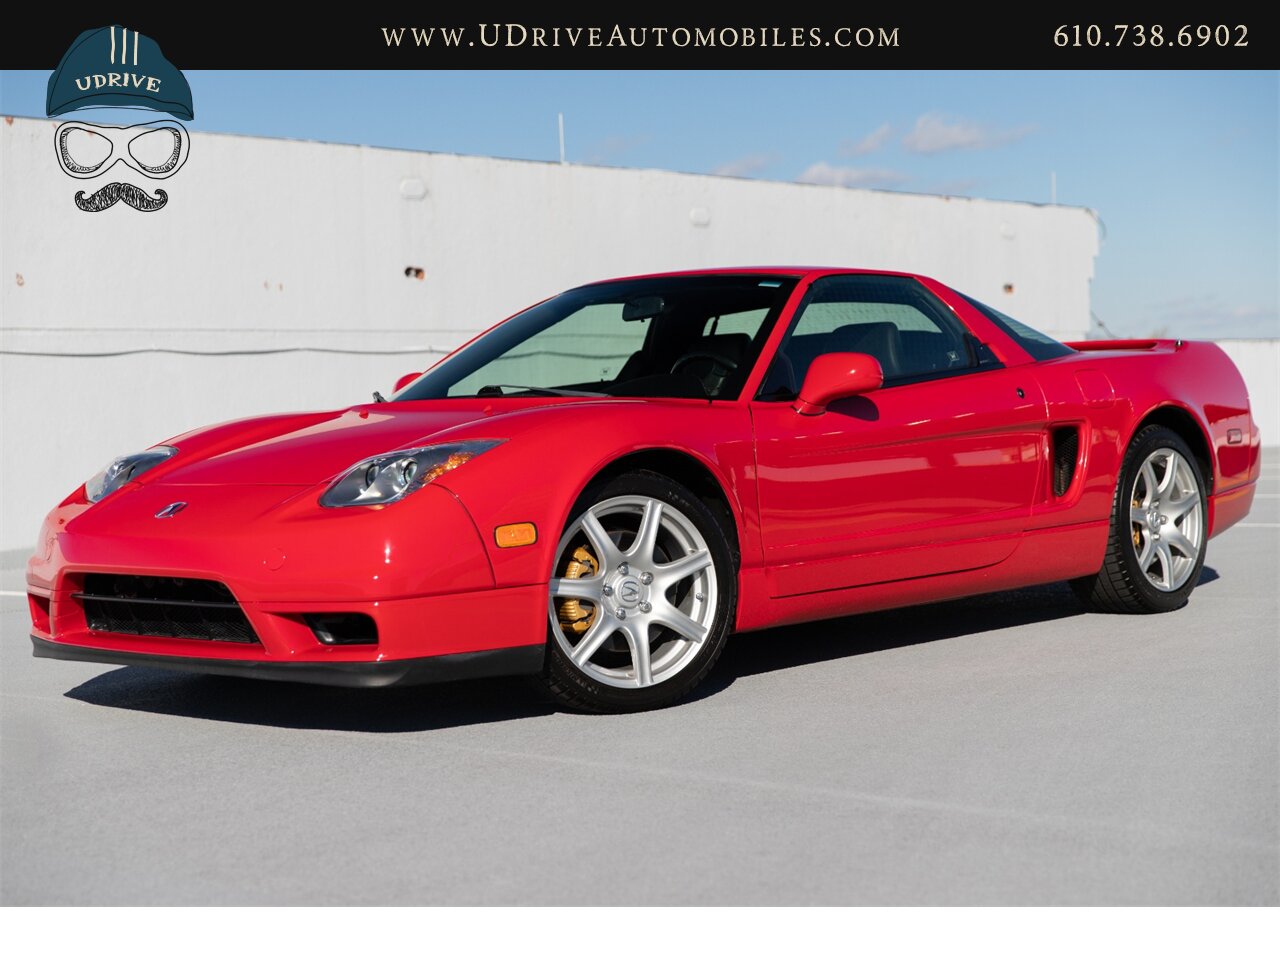 2004 Acura NSX NSX-T 21k mIles Red over Black  Fresh Timing Belt Service - Photo 1 - West Chester, PA 19382